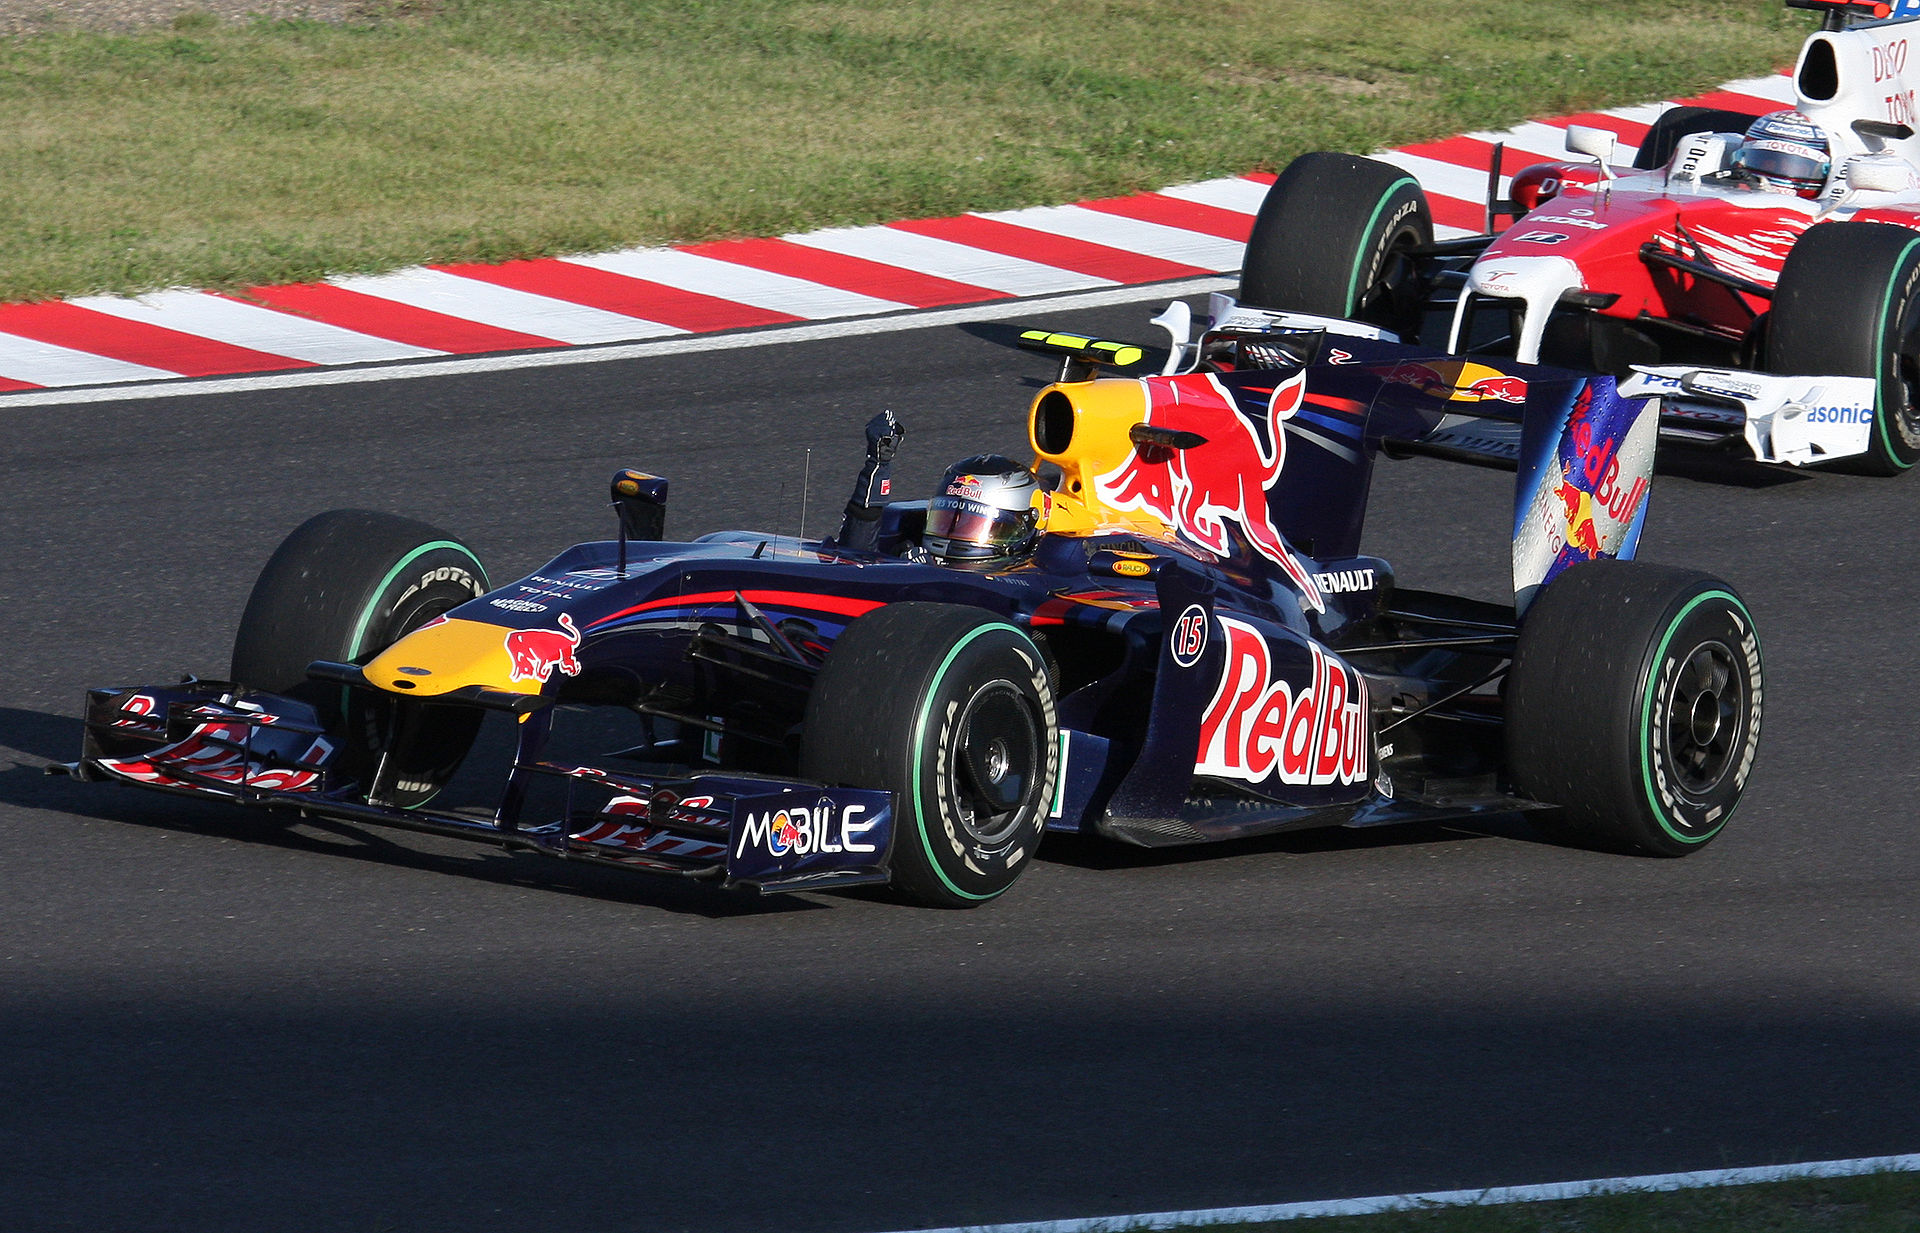 2009 Japanese Grand Prix, Red Bull RB5 equipped with KERS unit, wikimedia 